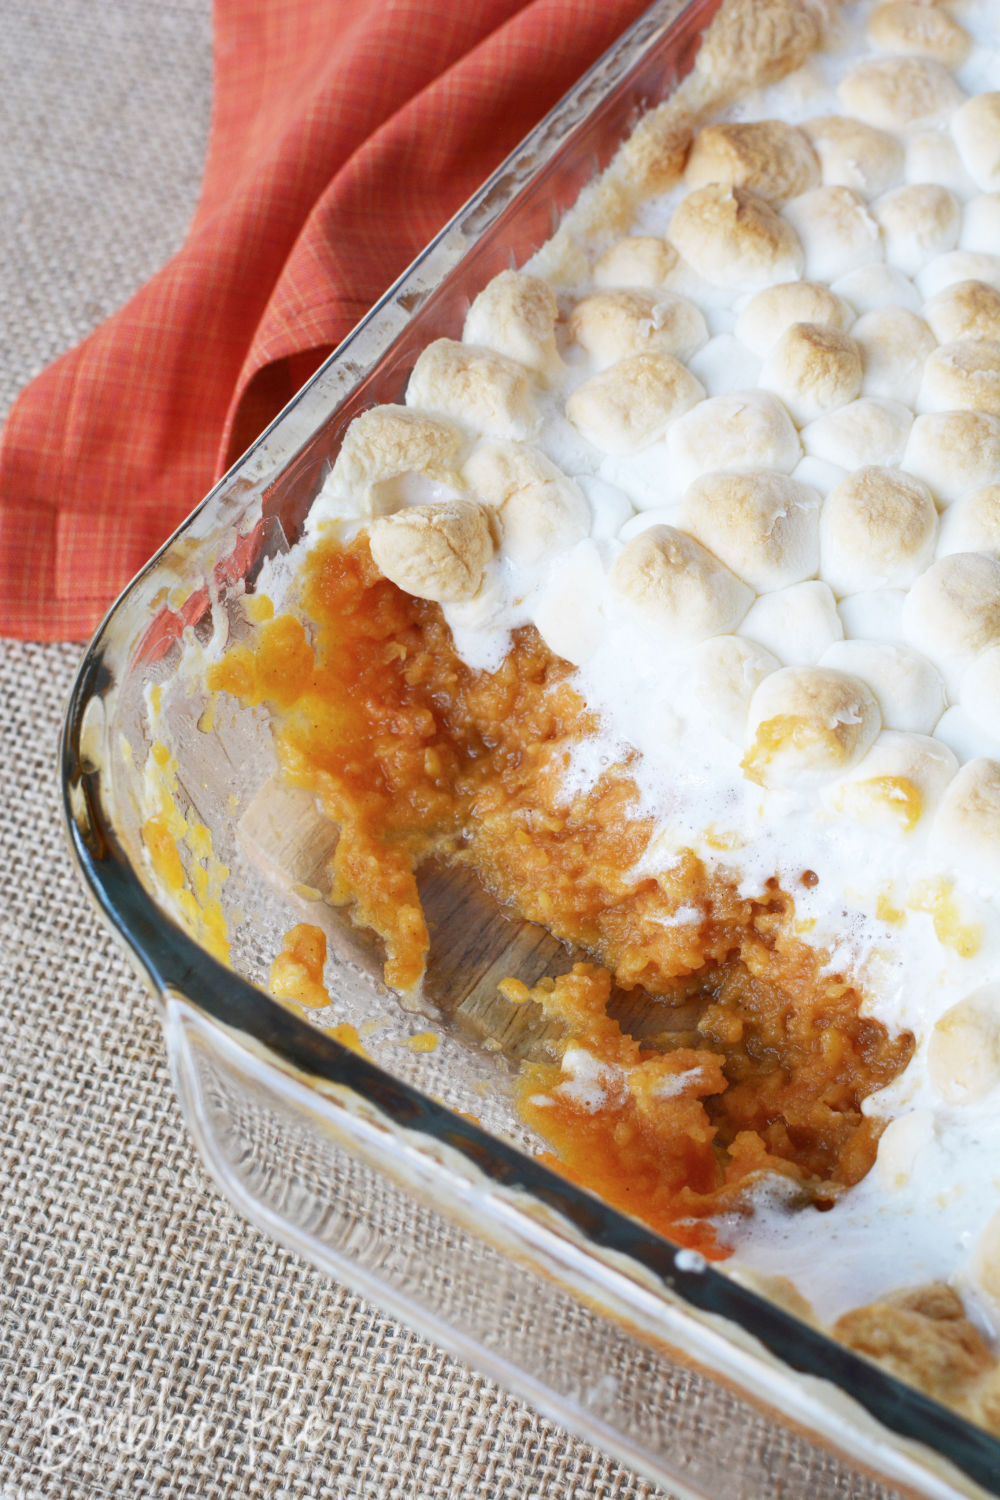 Easy Sweet Potato Casserole With Marshmallows Recipe Bubbapie,Rotel Dip Recipe With Ground Beef